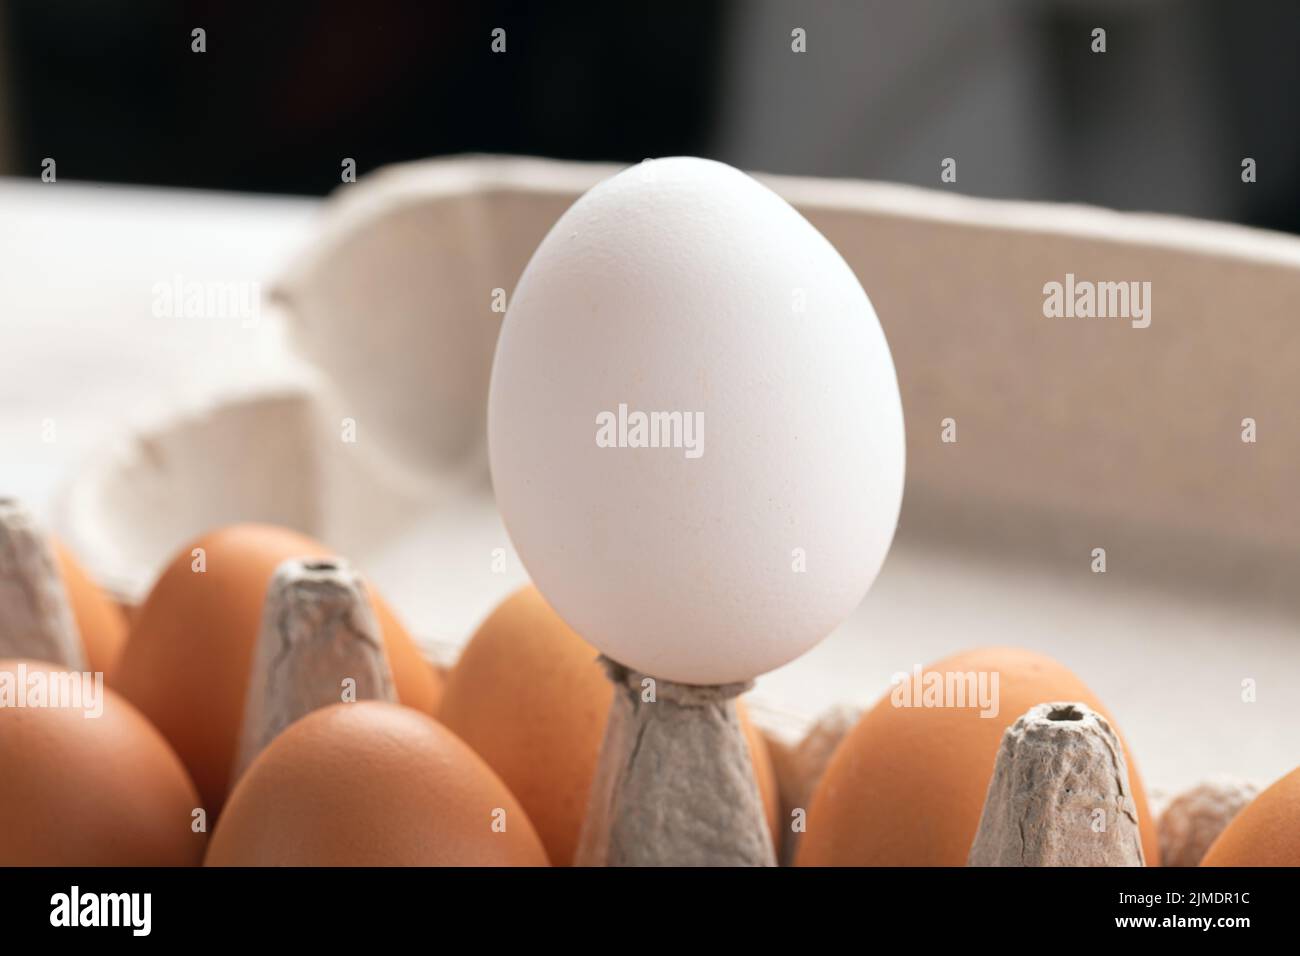 One white egg rises above brown eggs. concept of leadership in team. One best instance surrounded by ordinary objects Stock Photo